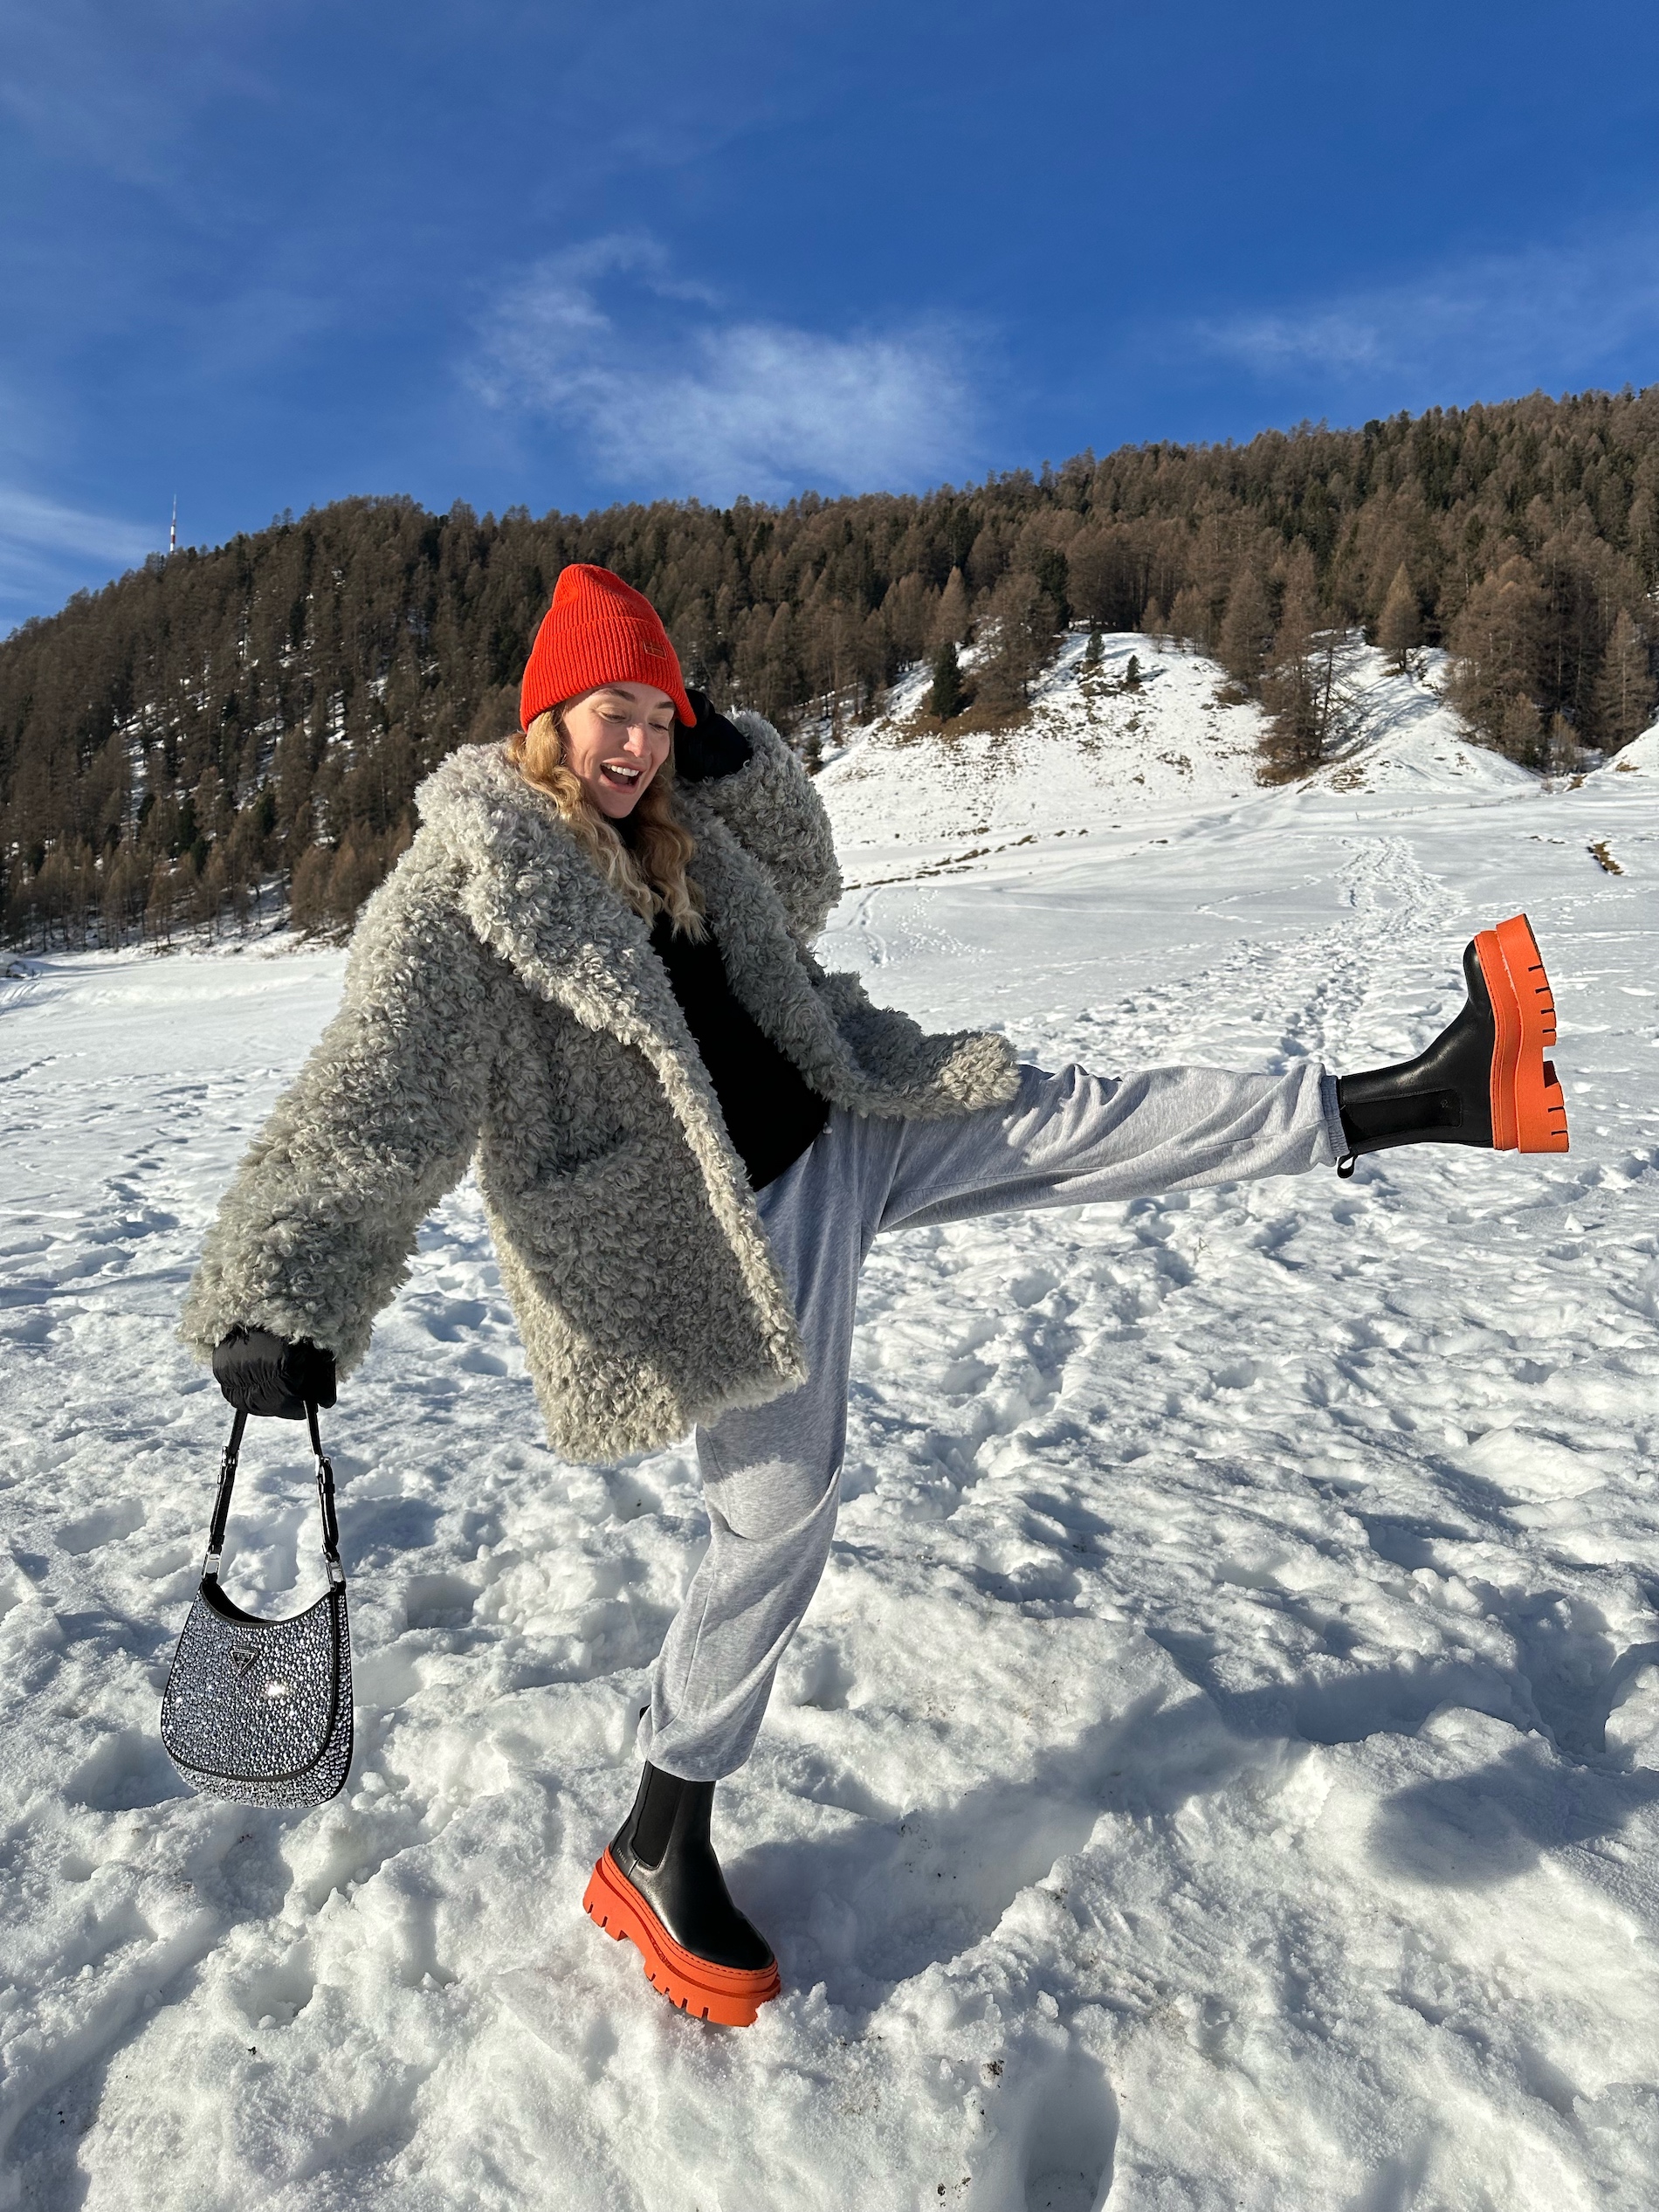 @sonialyson combined the CPH686 vitello black/orange with a cozy fake fur coat, a basic black shirt and comfortable joggers for a funny day in the snow.